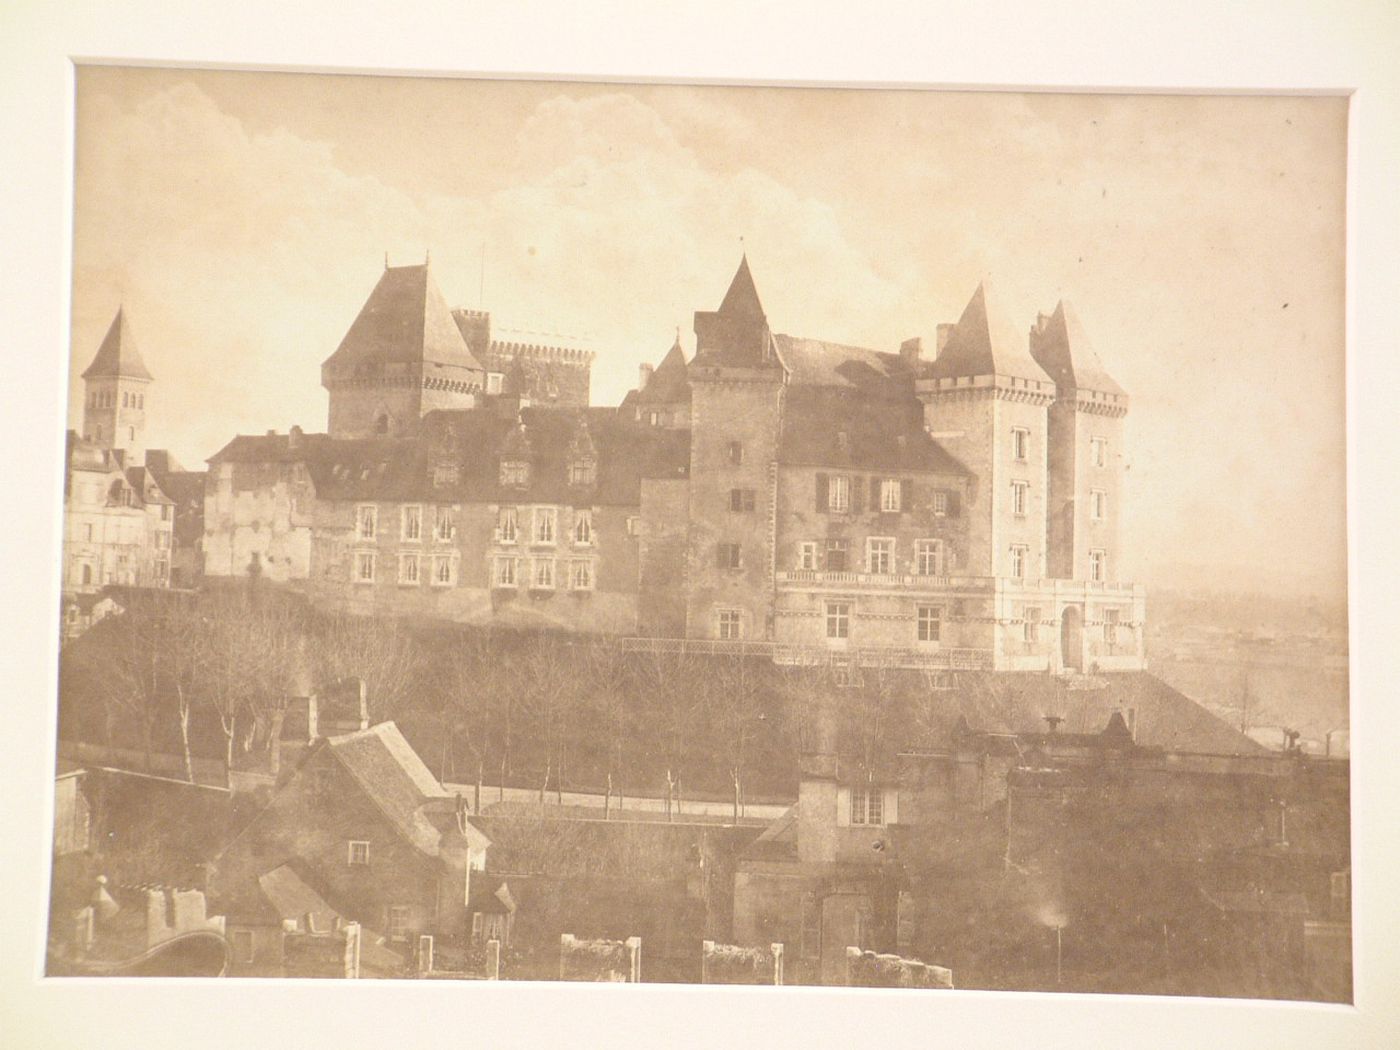 General view of Château with church in background, houses in foreground, Pau, France